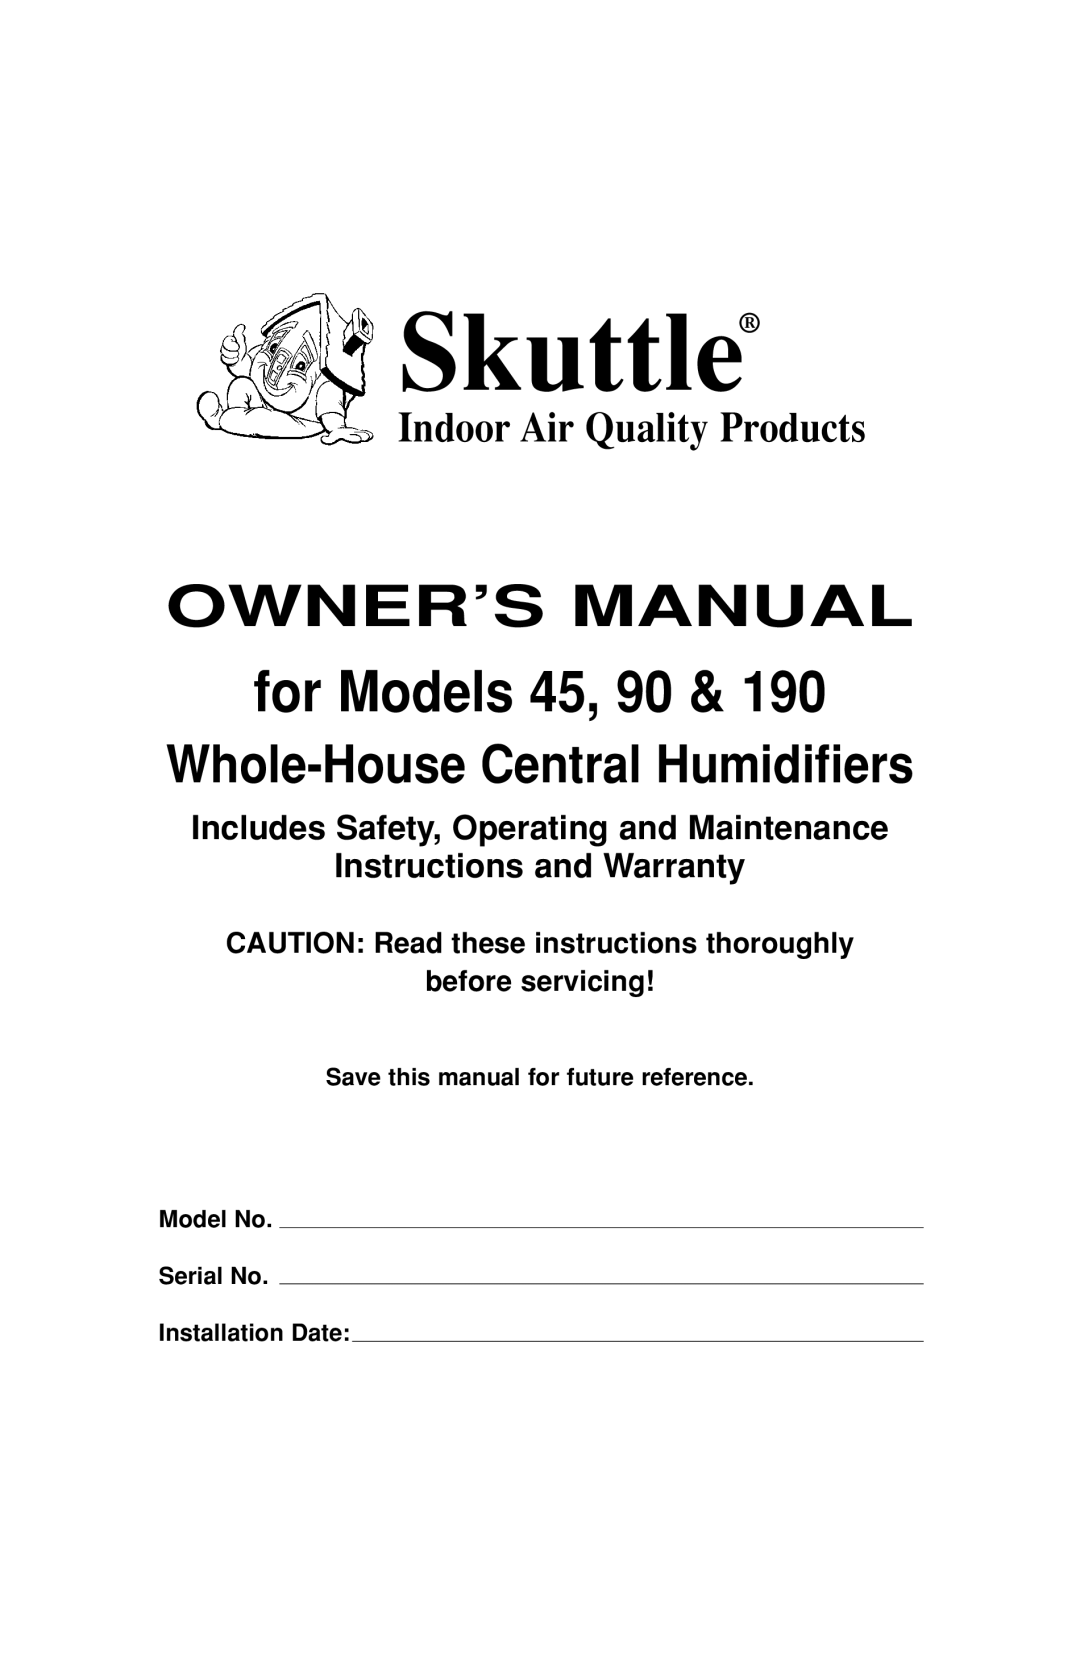 Skuttle Indoor Air Quality Products 90 owner manual Includes Safety, Operating and Maintenance, Instructions and Warranty 